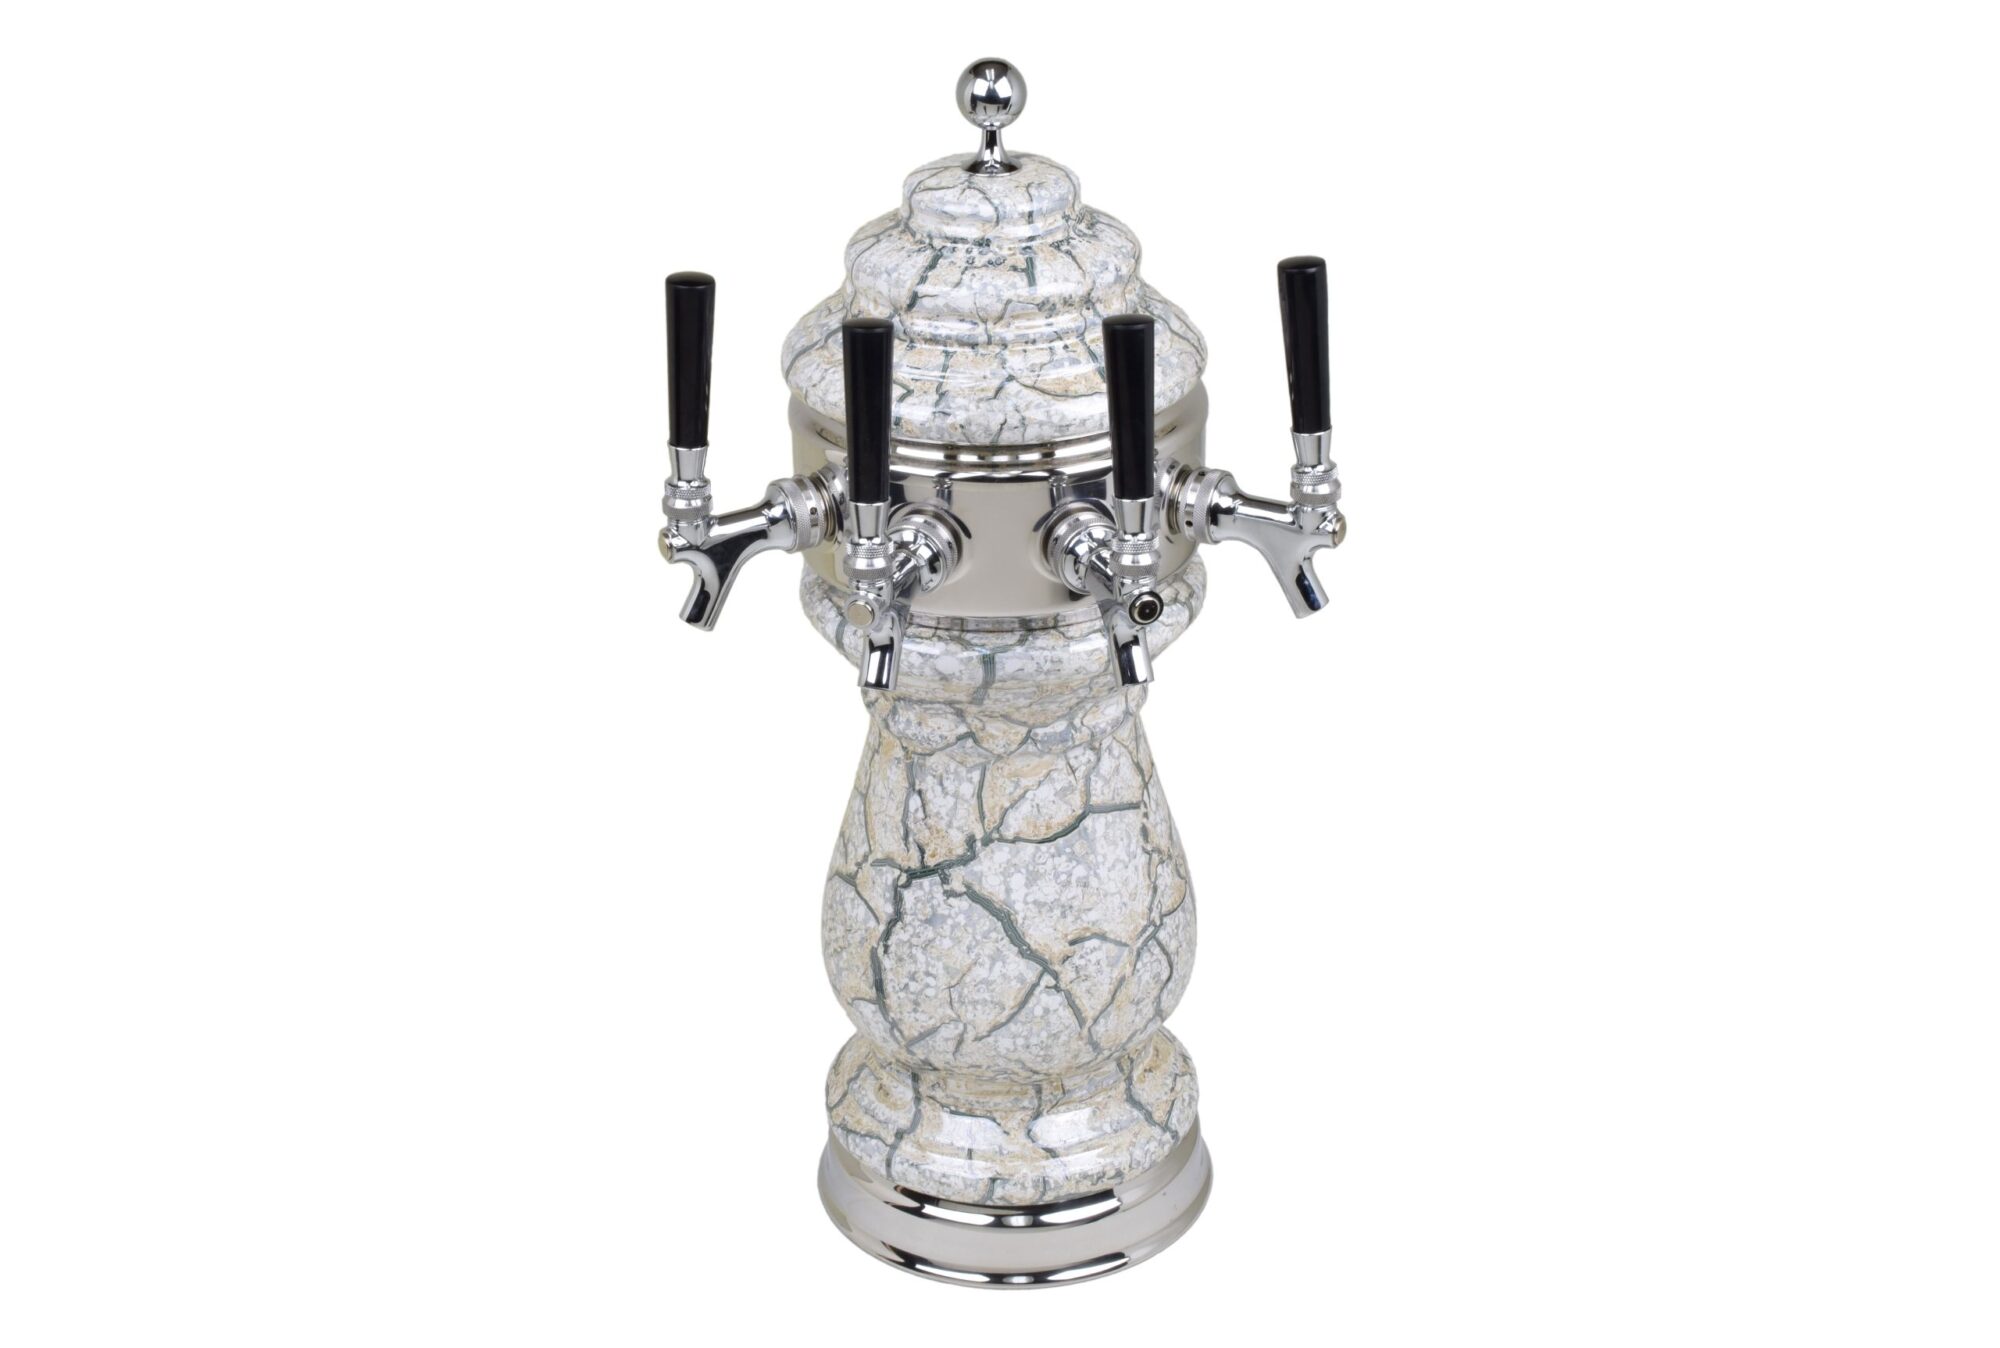 882C-4BeigeMarble Four Faucet Ceramic Tower with Chrome Plated Hardware - Available in 5 Colors - Shown in Beige Marble